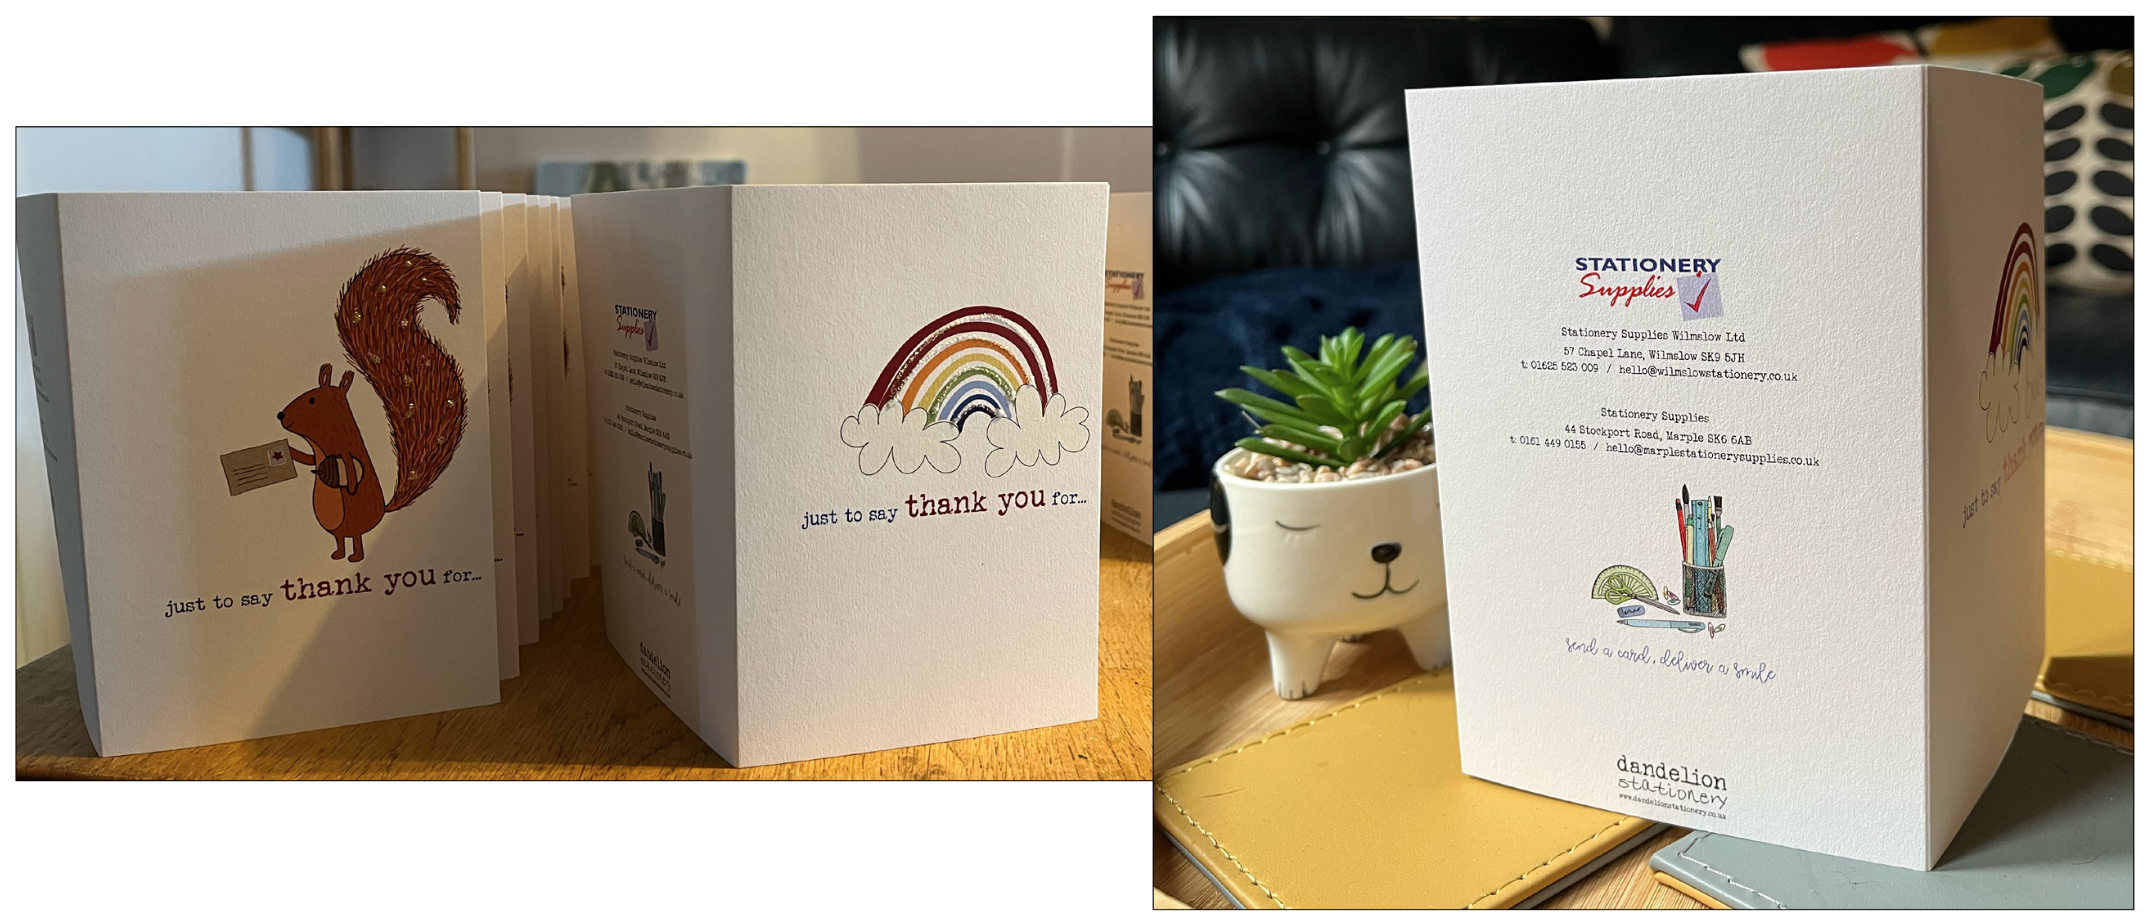 Above: Top turnaround – Stationery Supplies’ bespoke cards from Dandelion Stationery